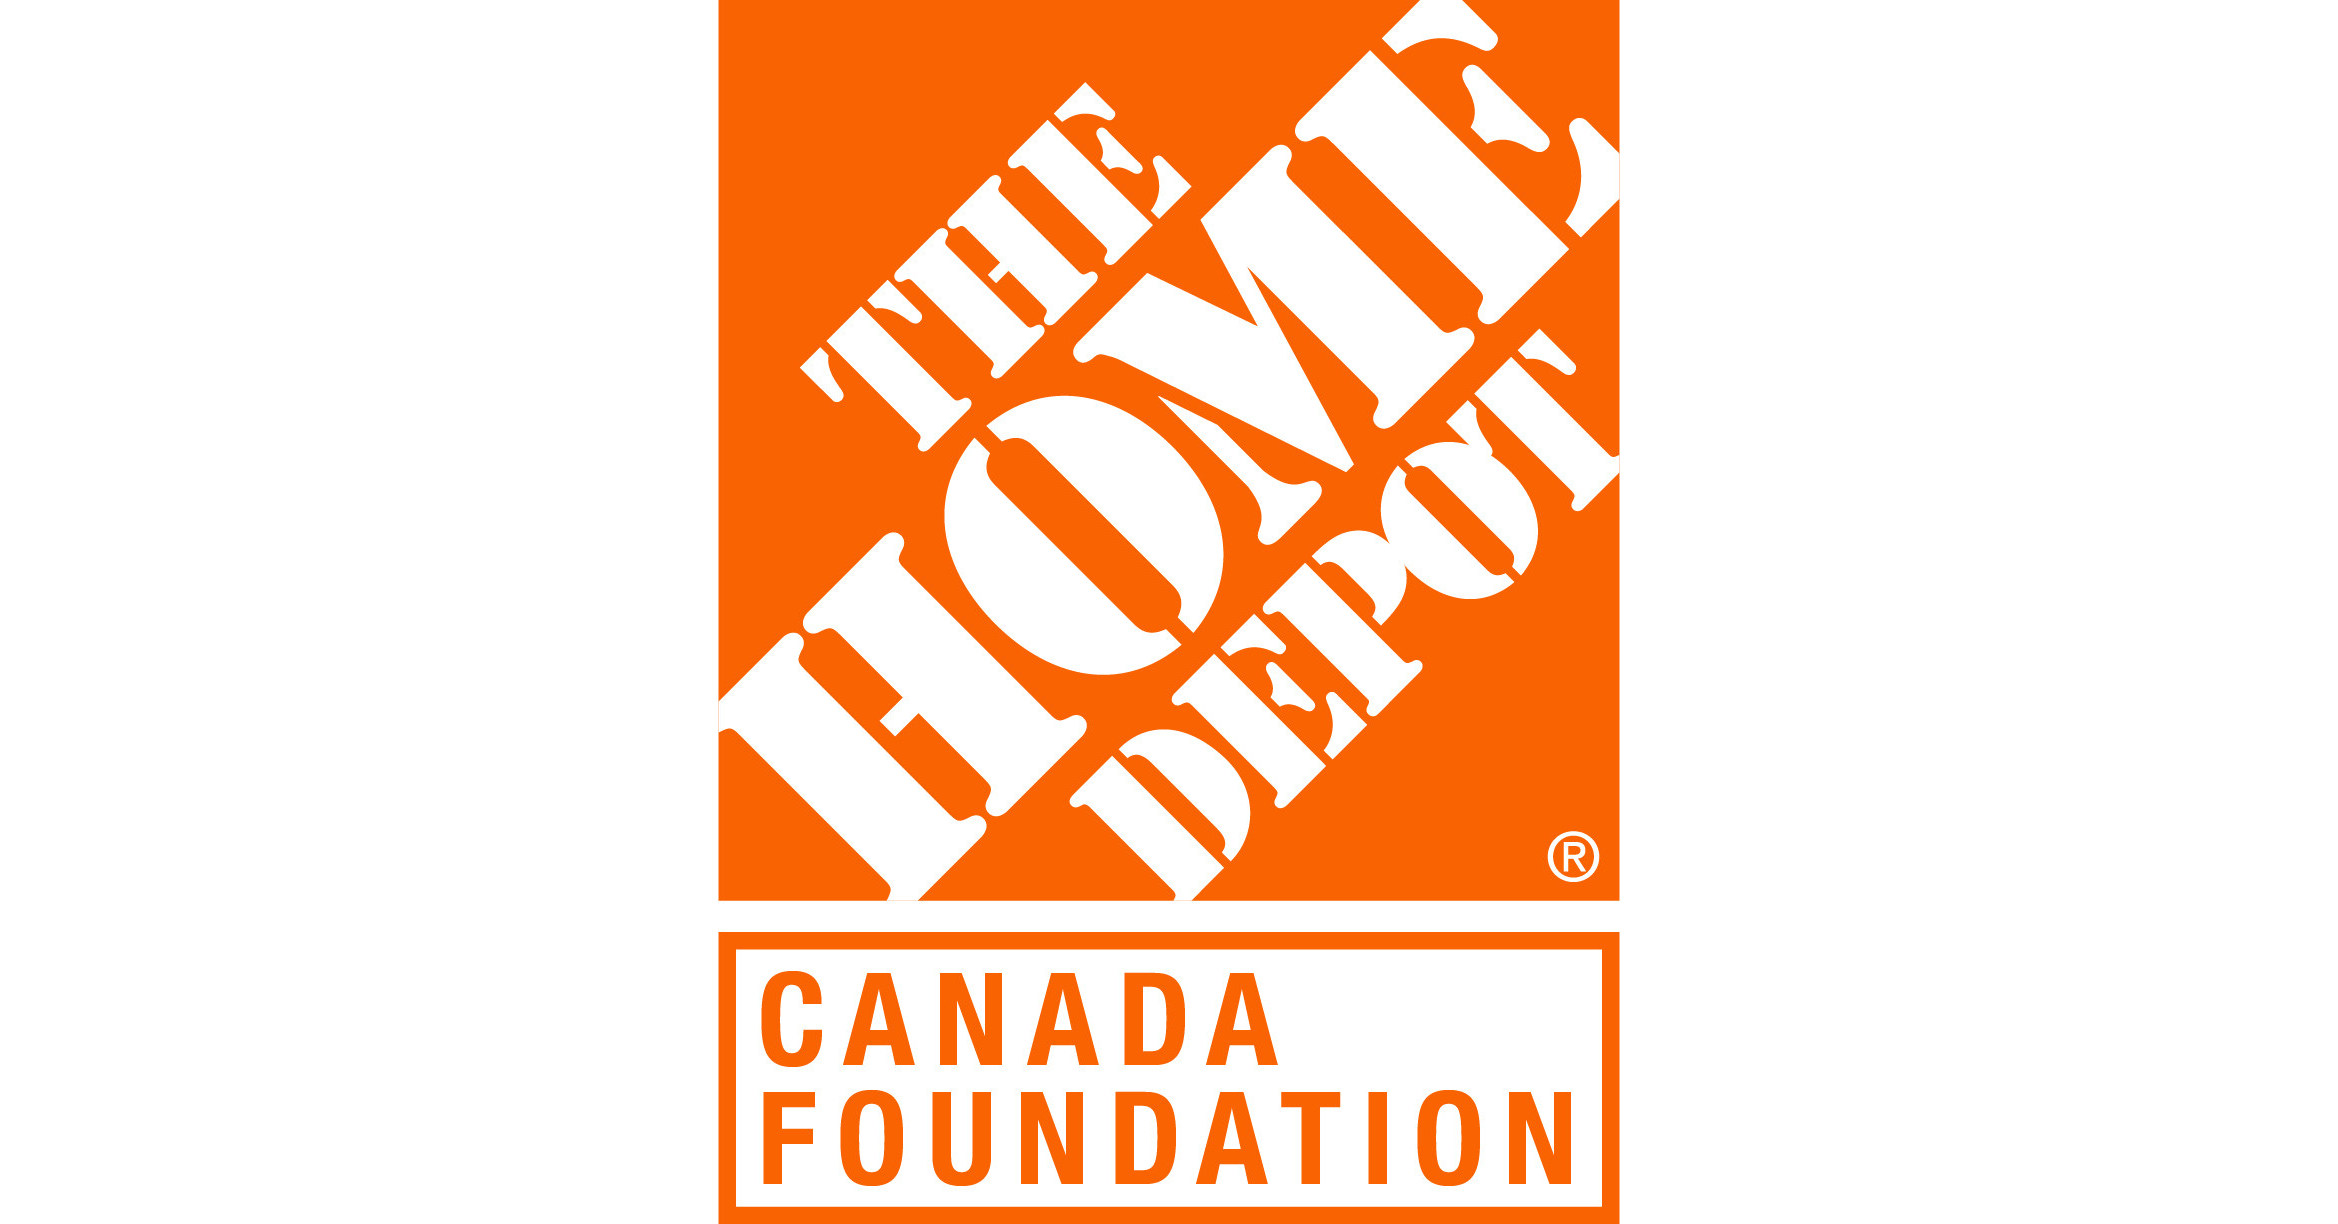 Home Depot Canada Mission, Benefits, and Work Culture